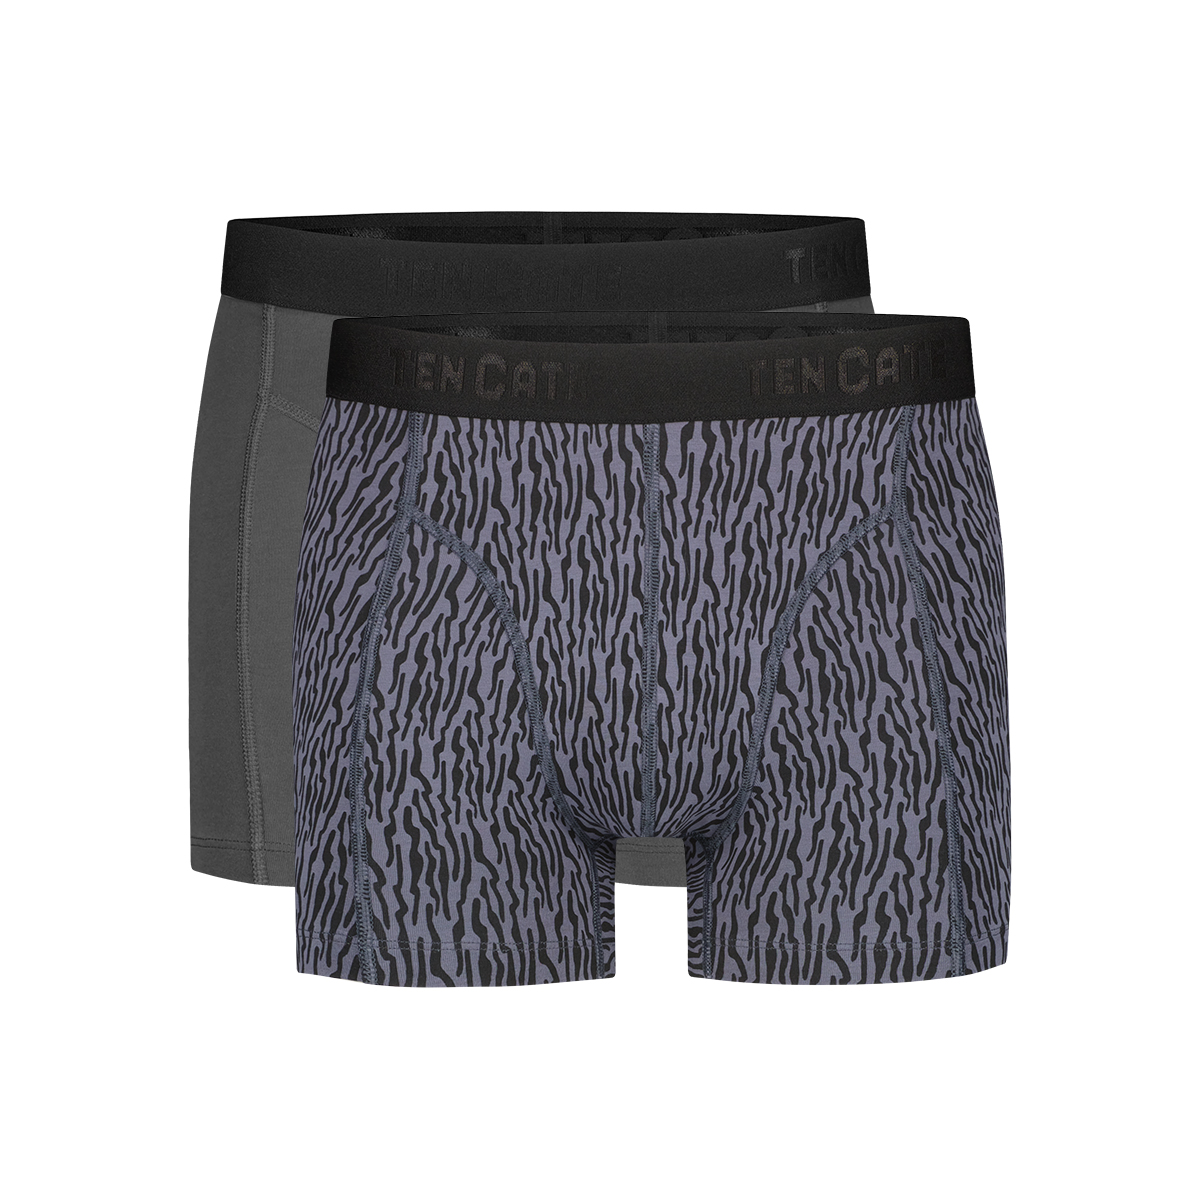 shorts cool lines grey 2 pack maat 2XL